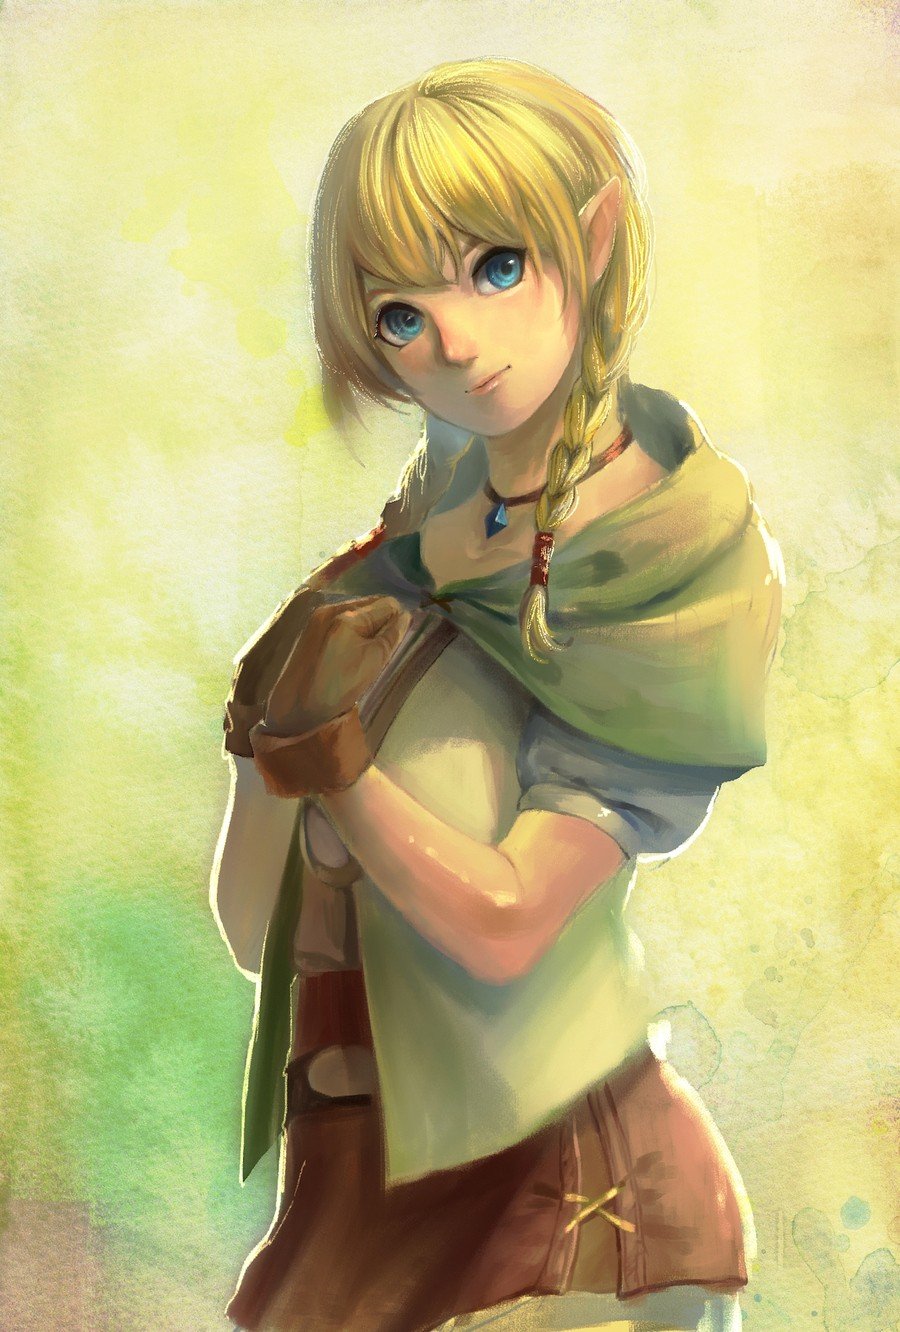 Gallery: There's Loads Of Awesome Linkle Fan Art Available Already.